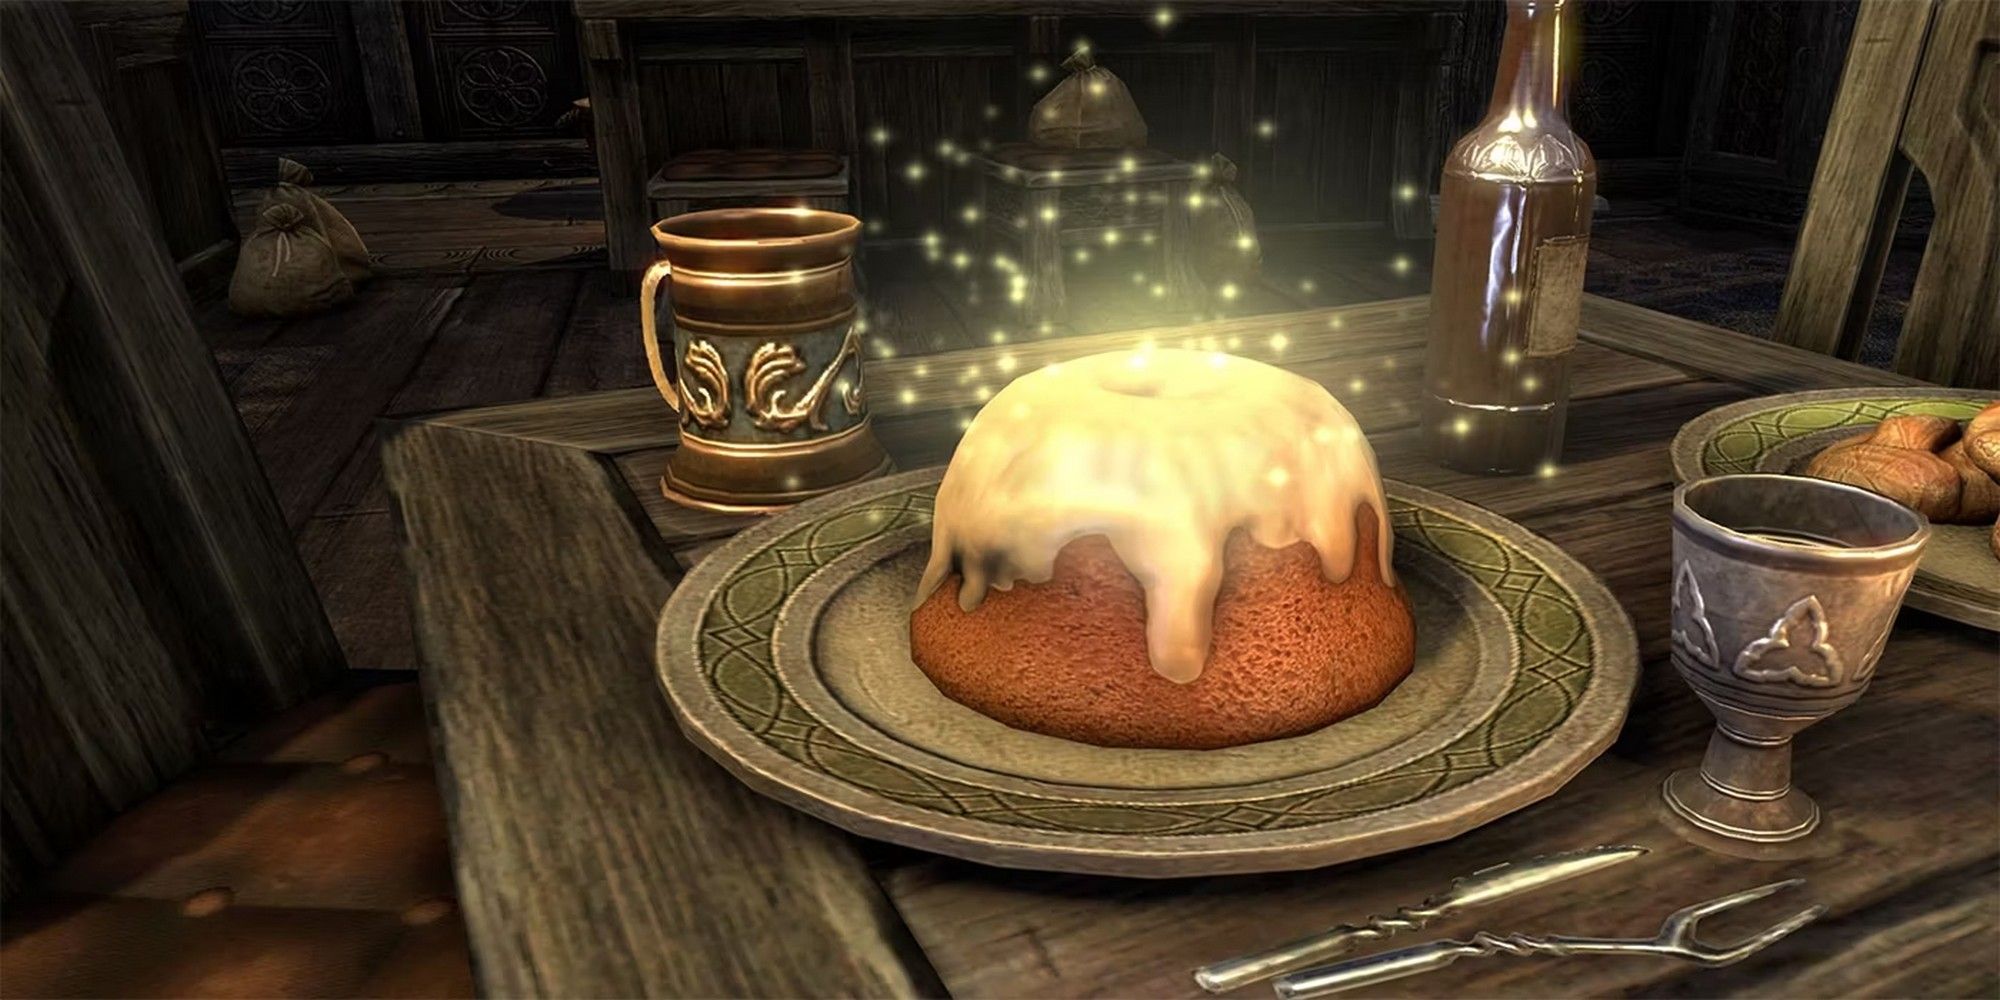 skyrim elder scrolls sweet roll plated on a table with glasses